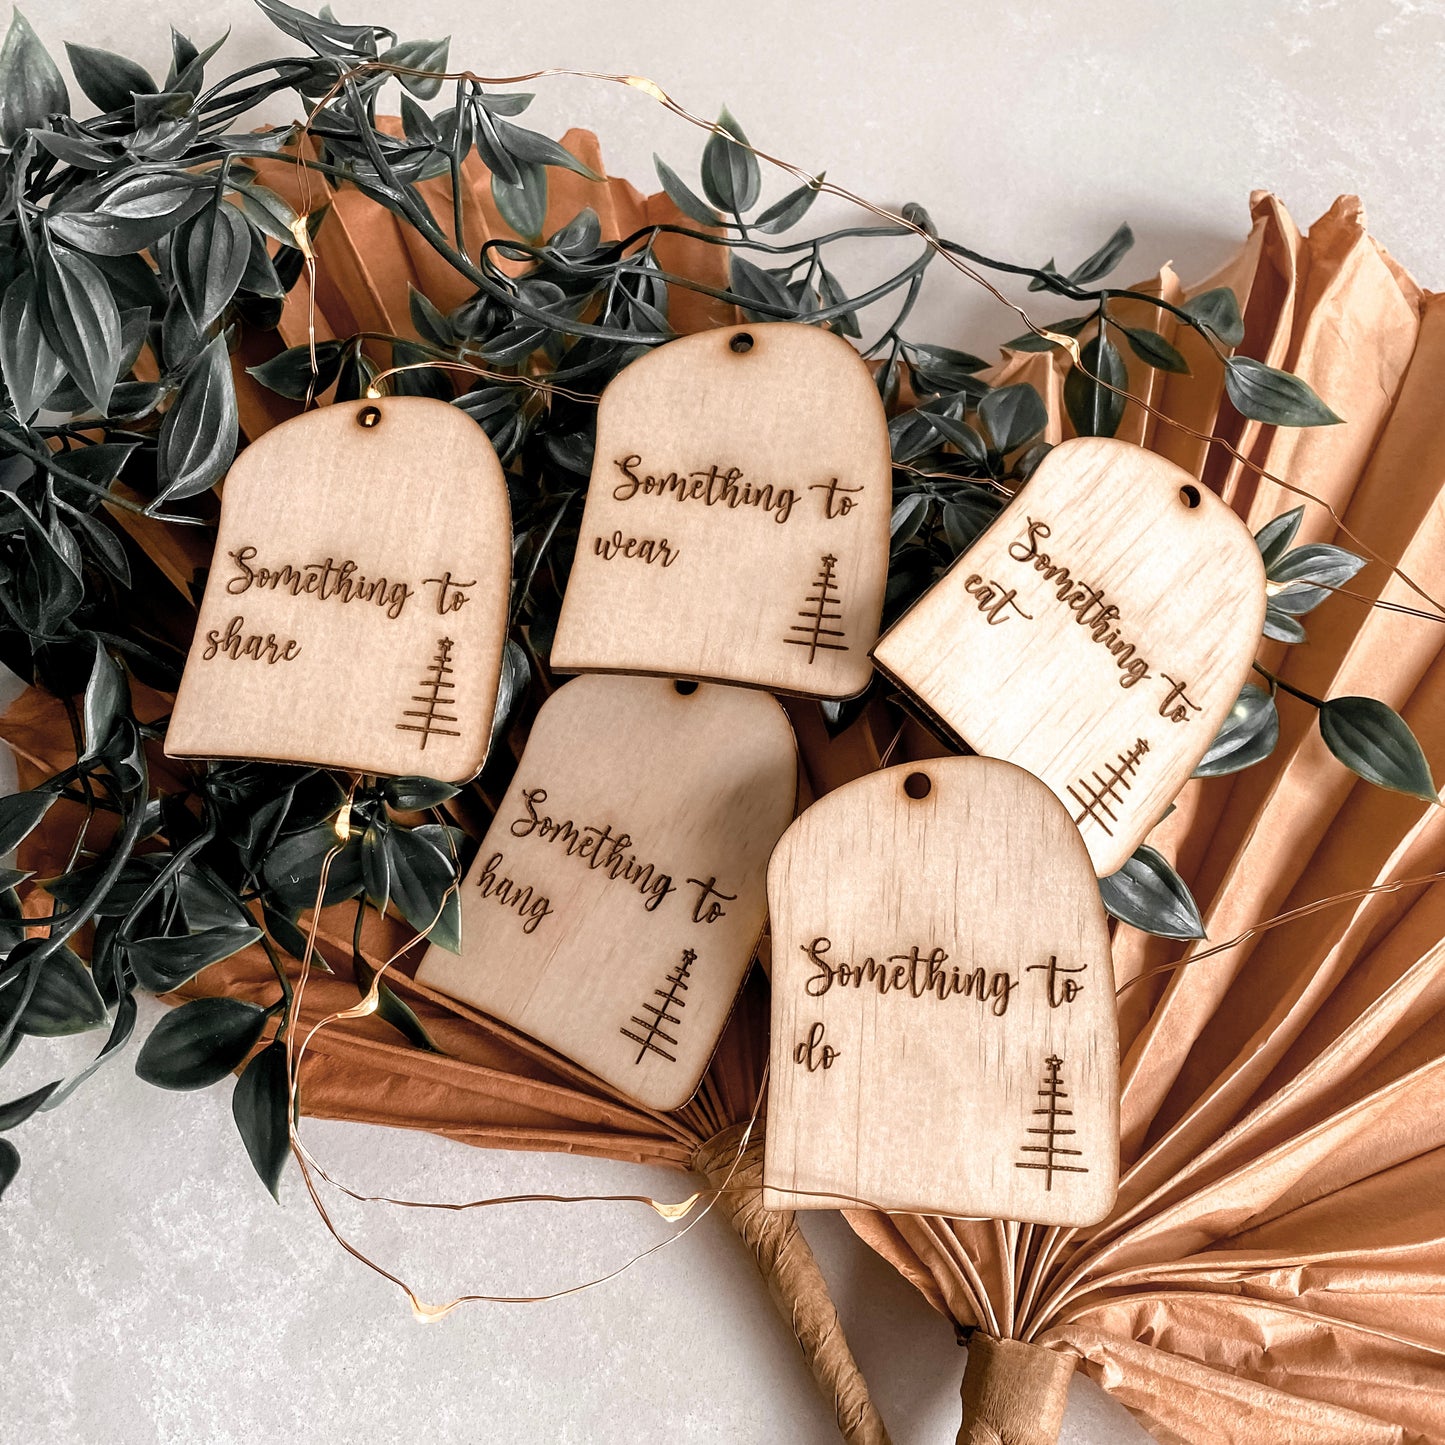 The Mindful Gifting Tags